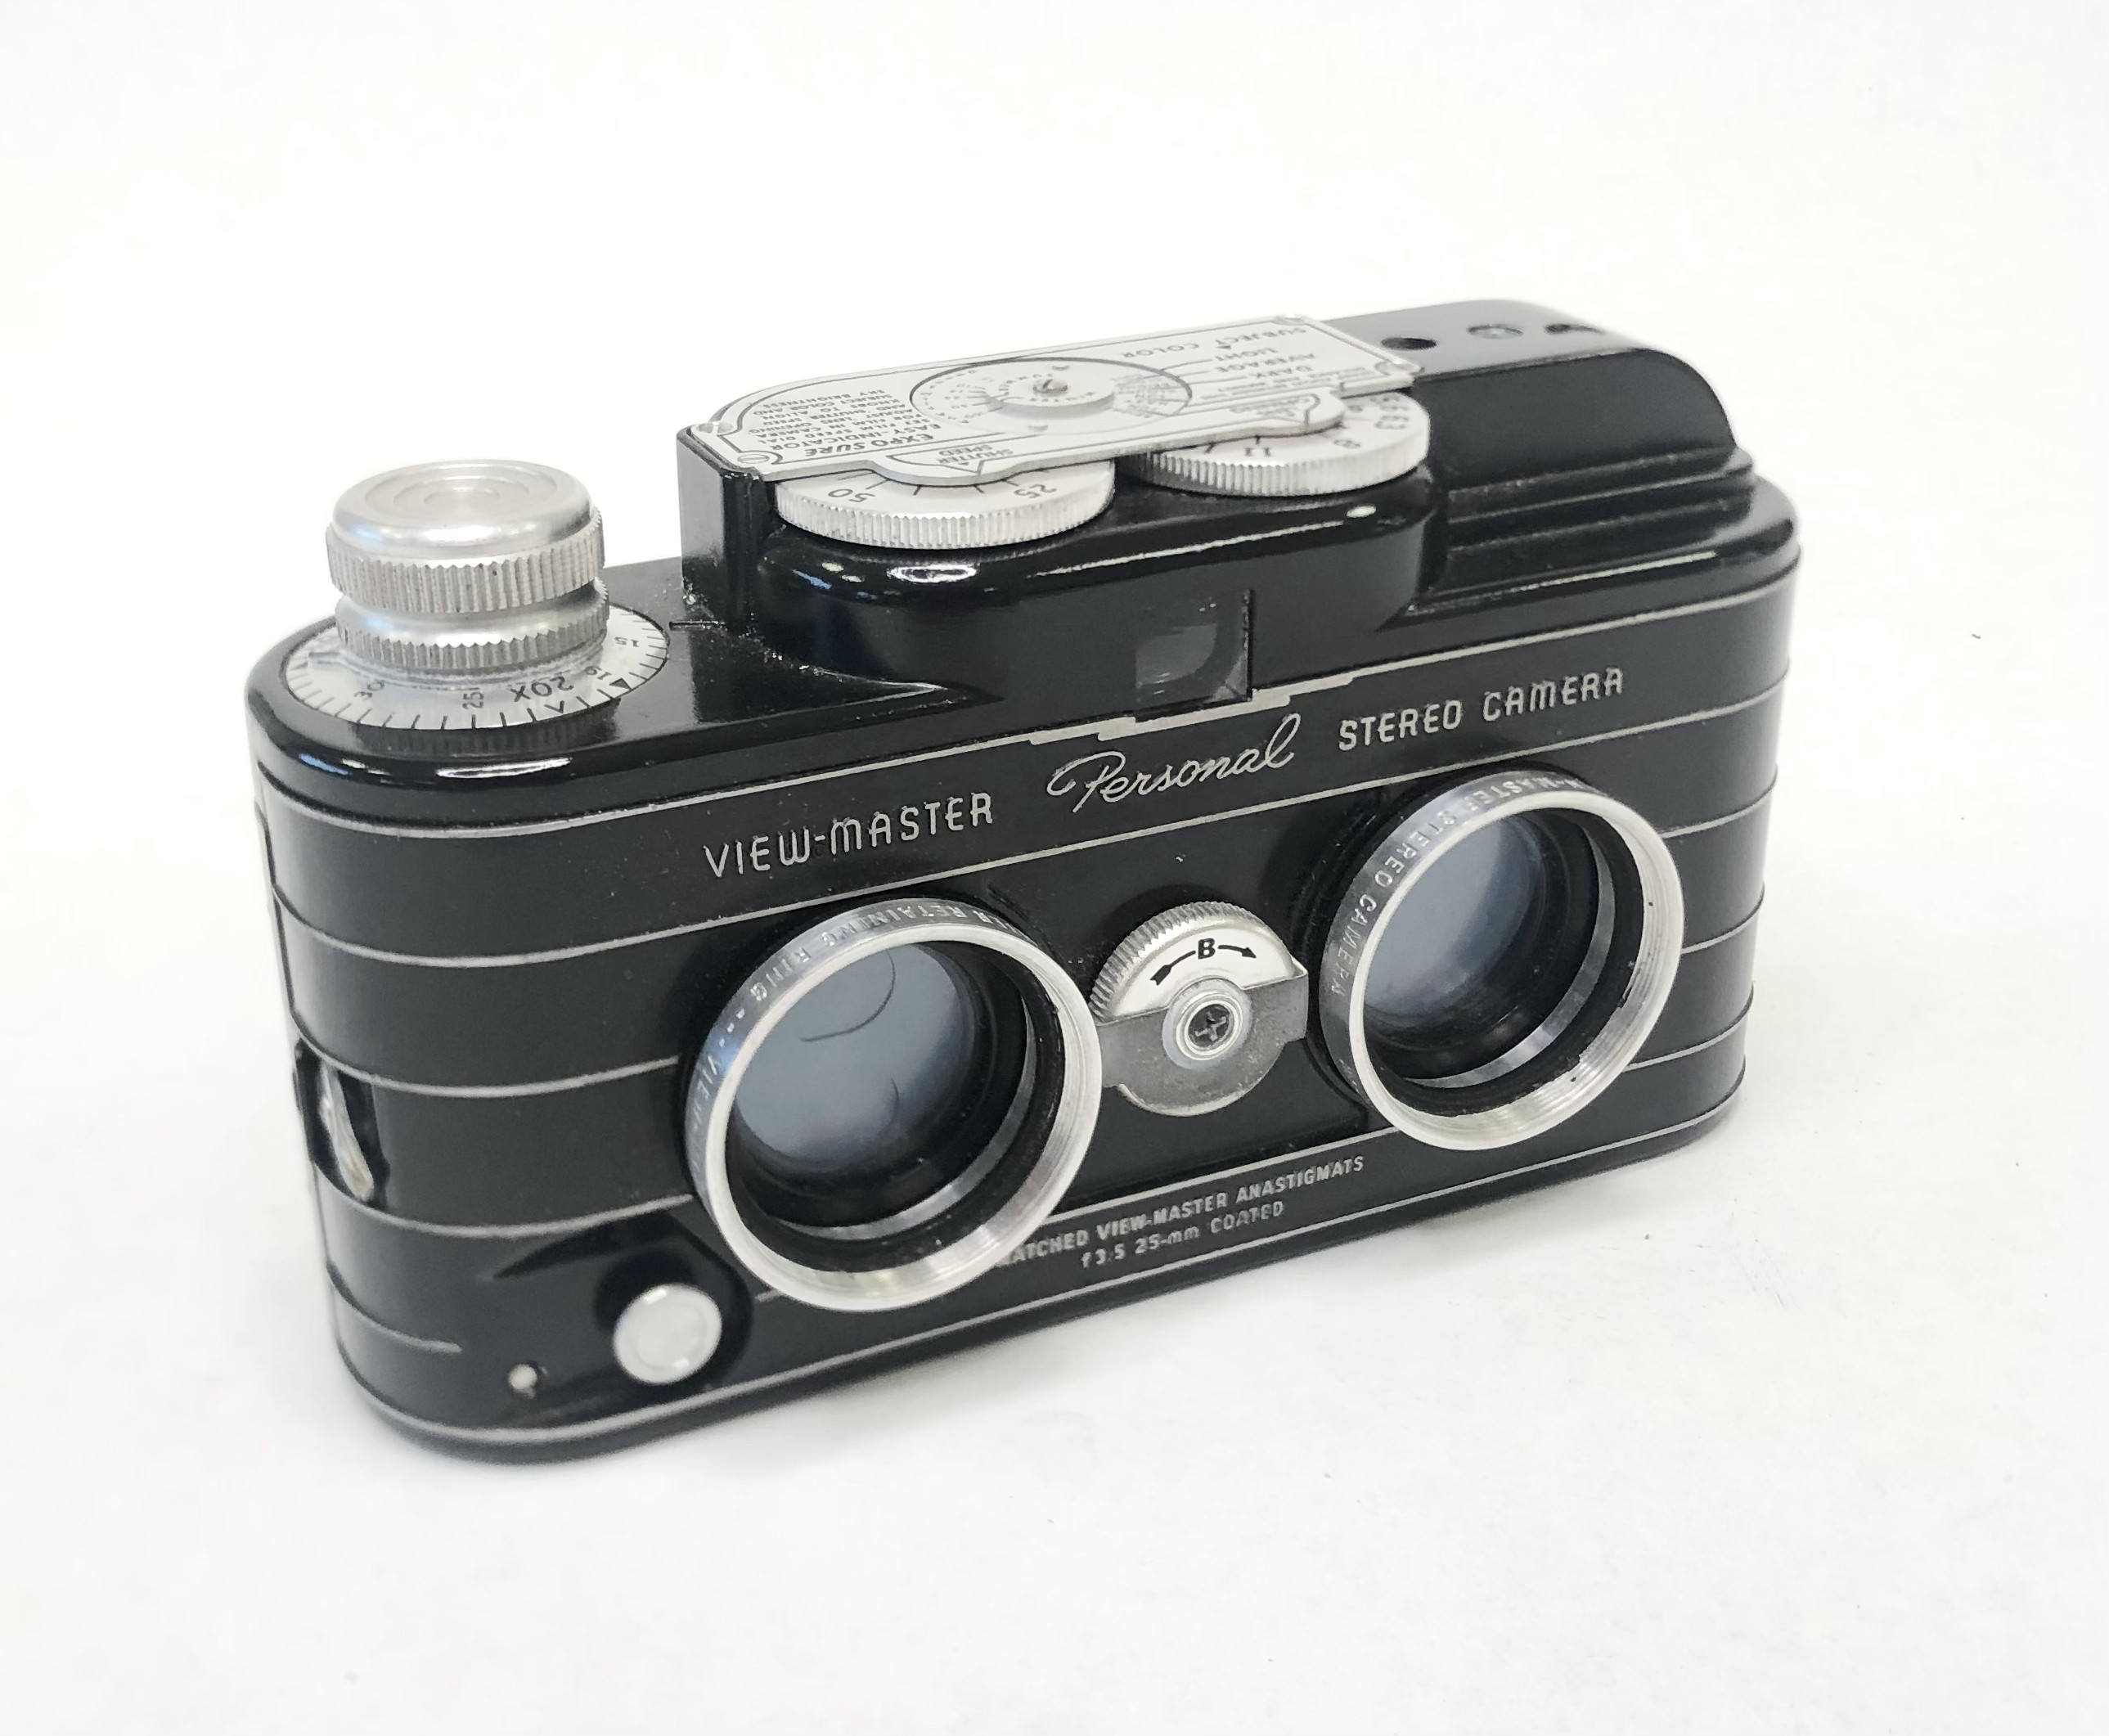 View-master Personal Stereo camera 1952